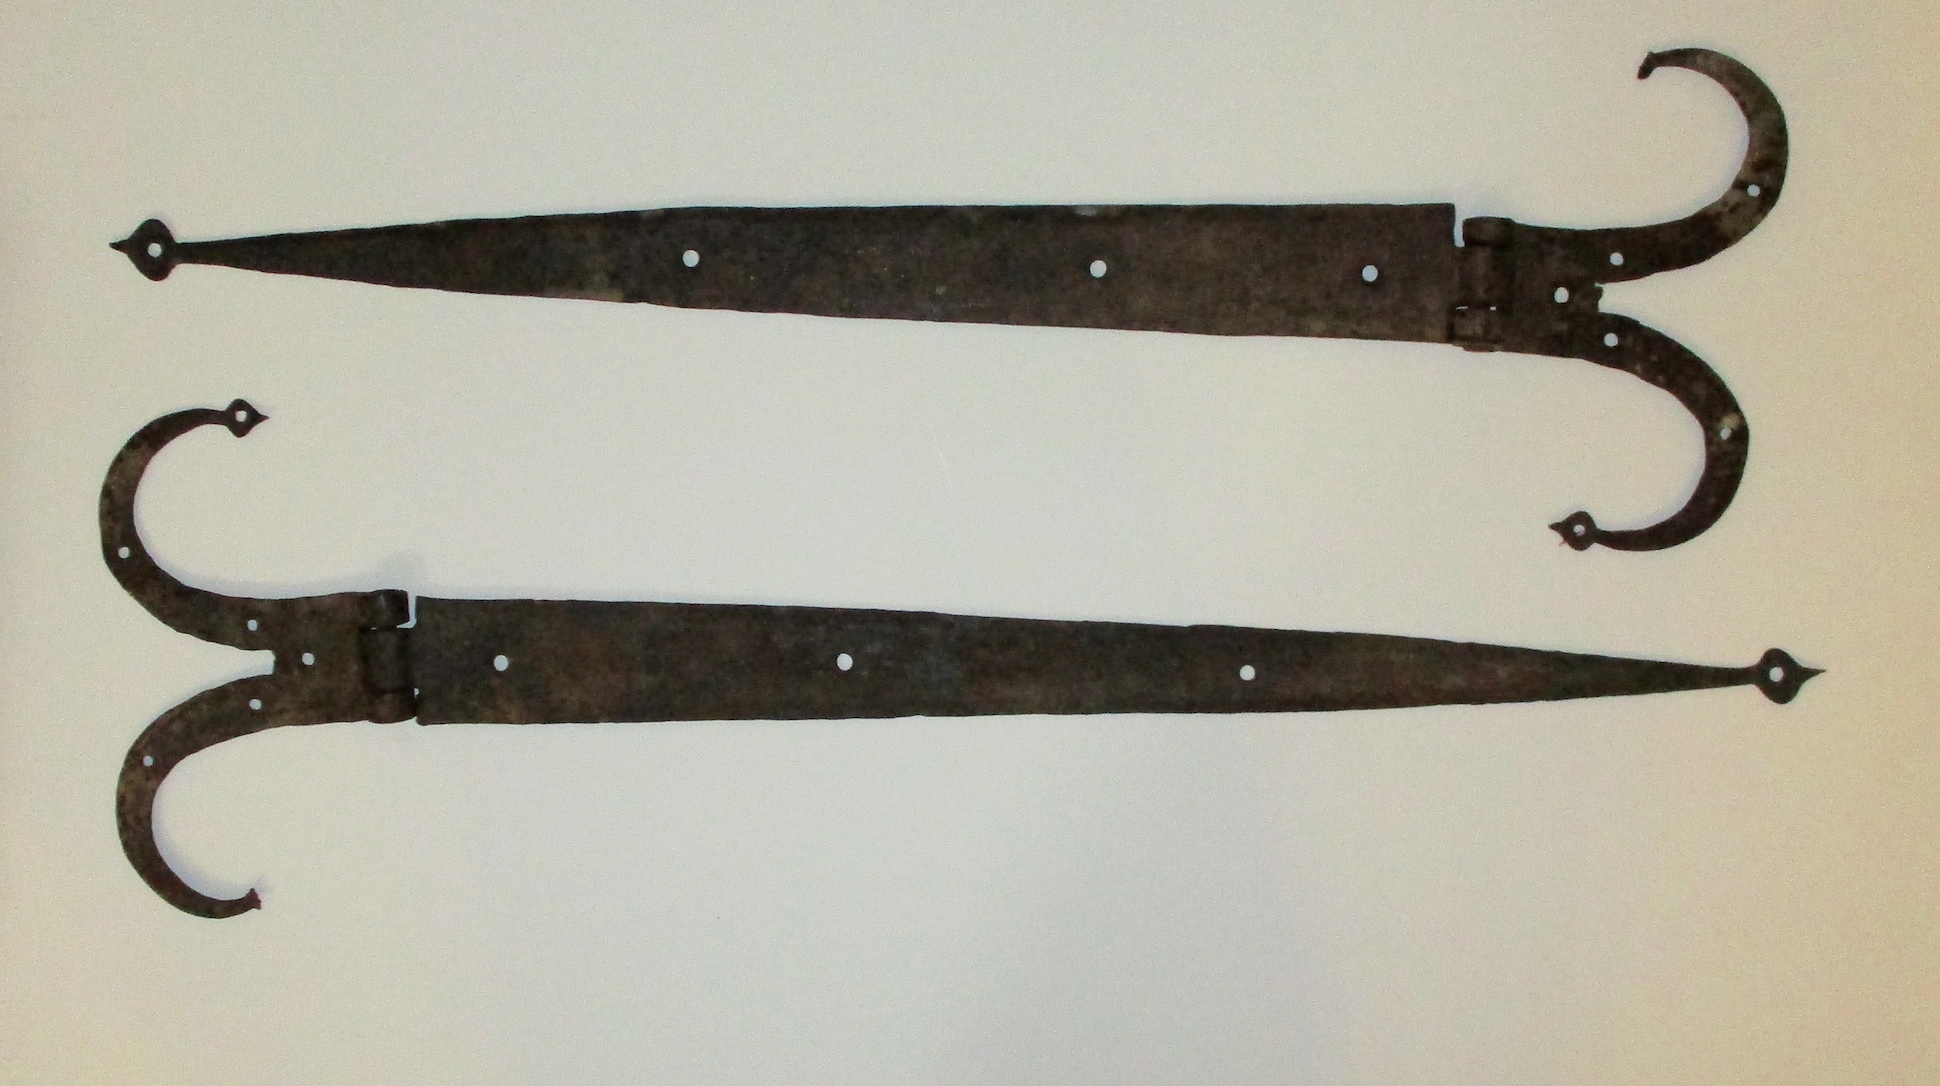 Pair of 19th Century Hand-forged Iron Strap Hinges (32 1/2" x 9")